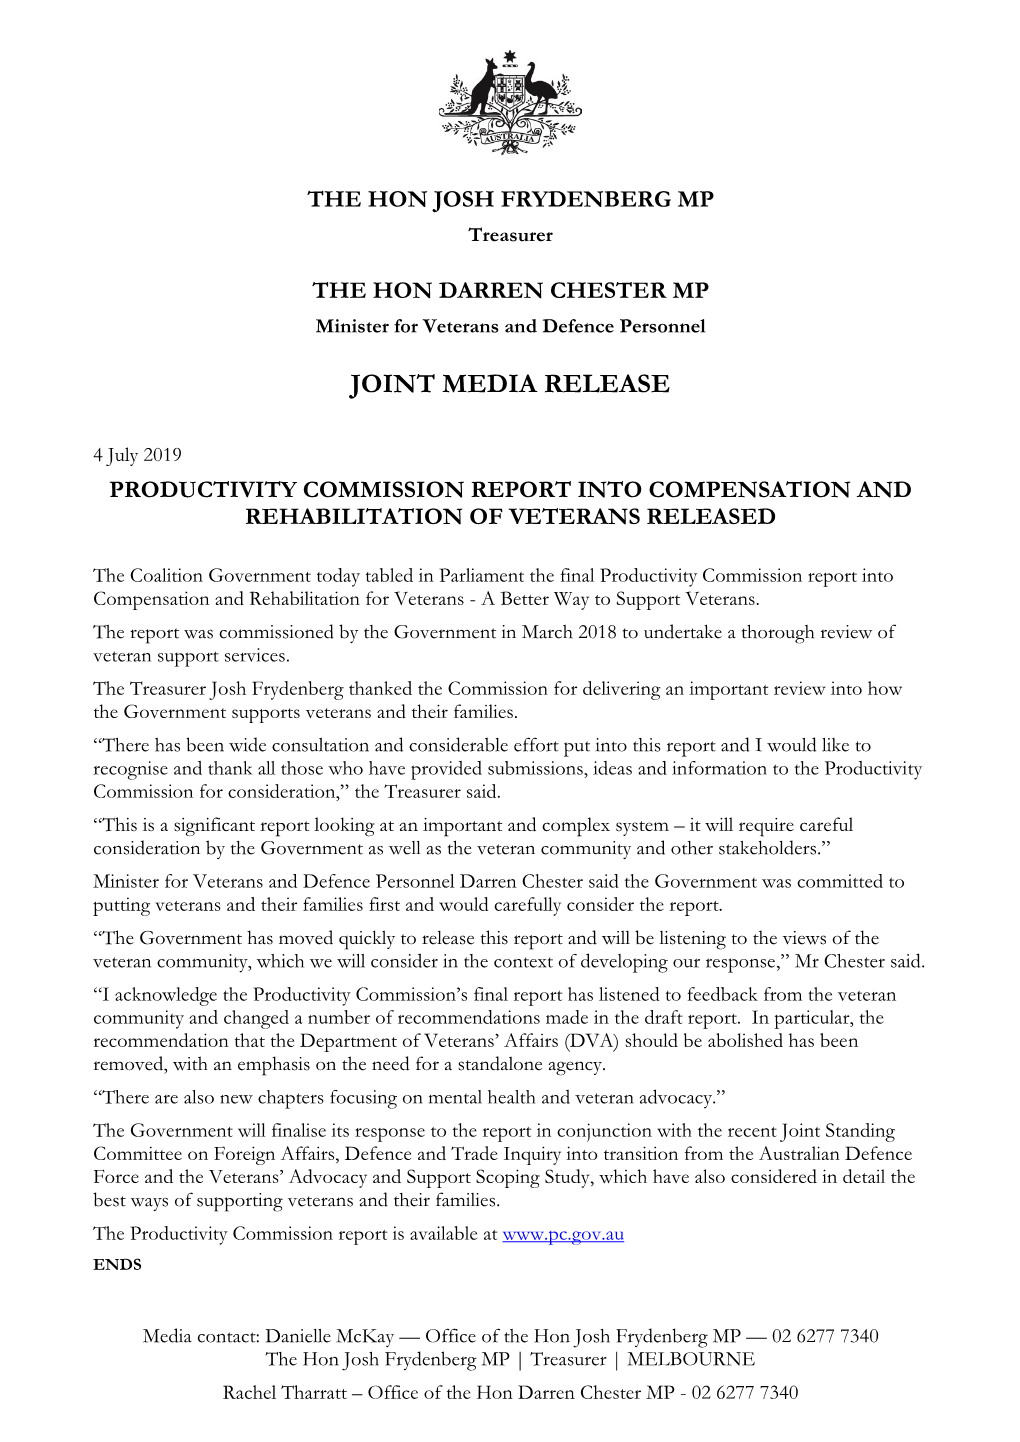 Joint Media Release